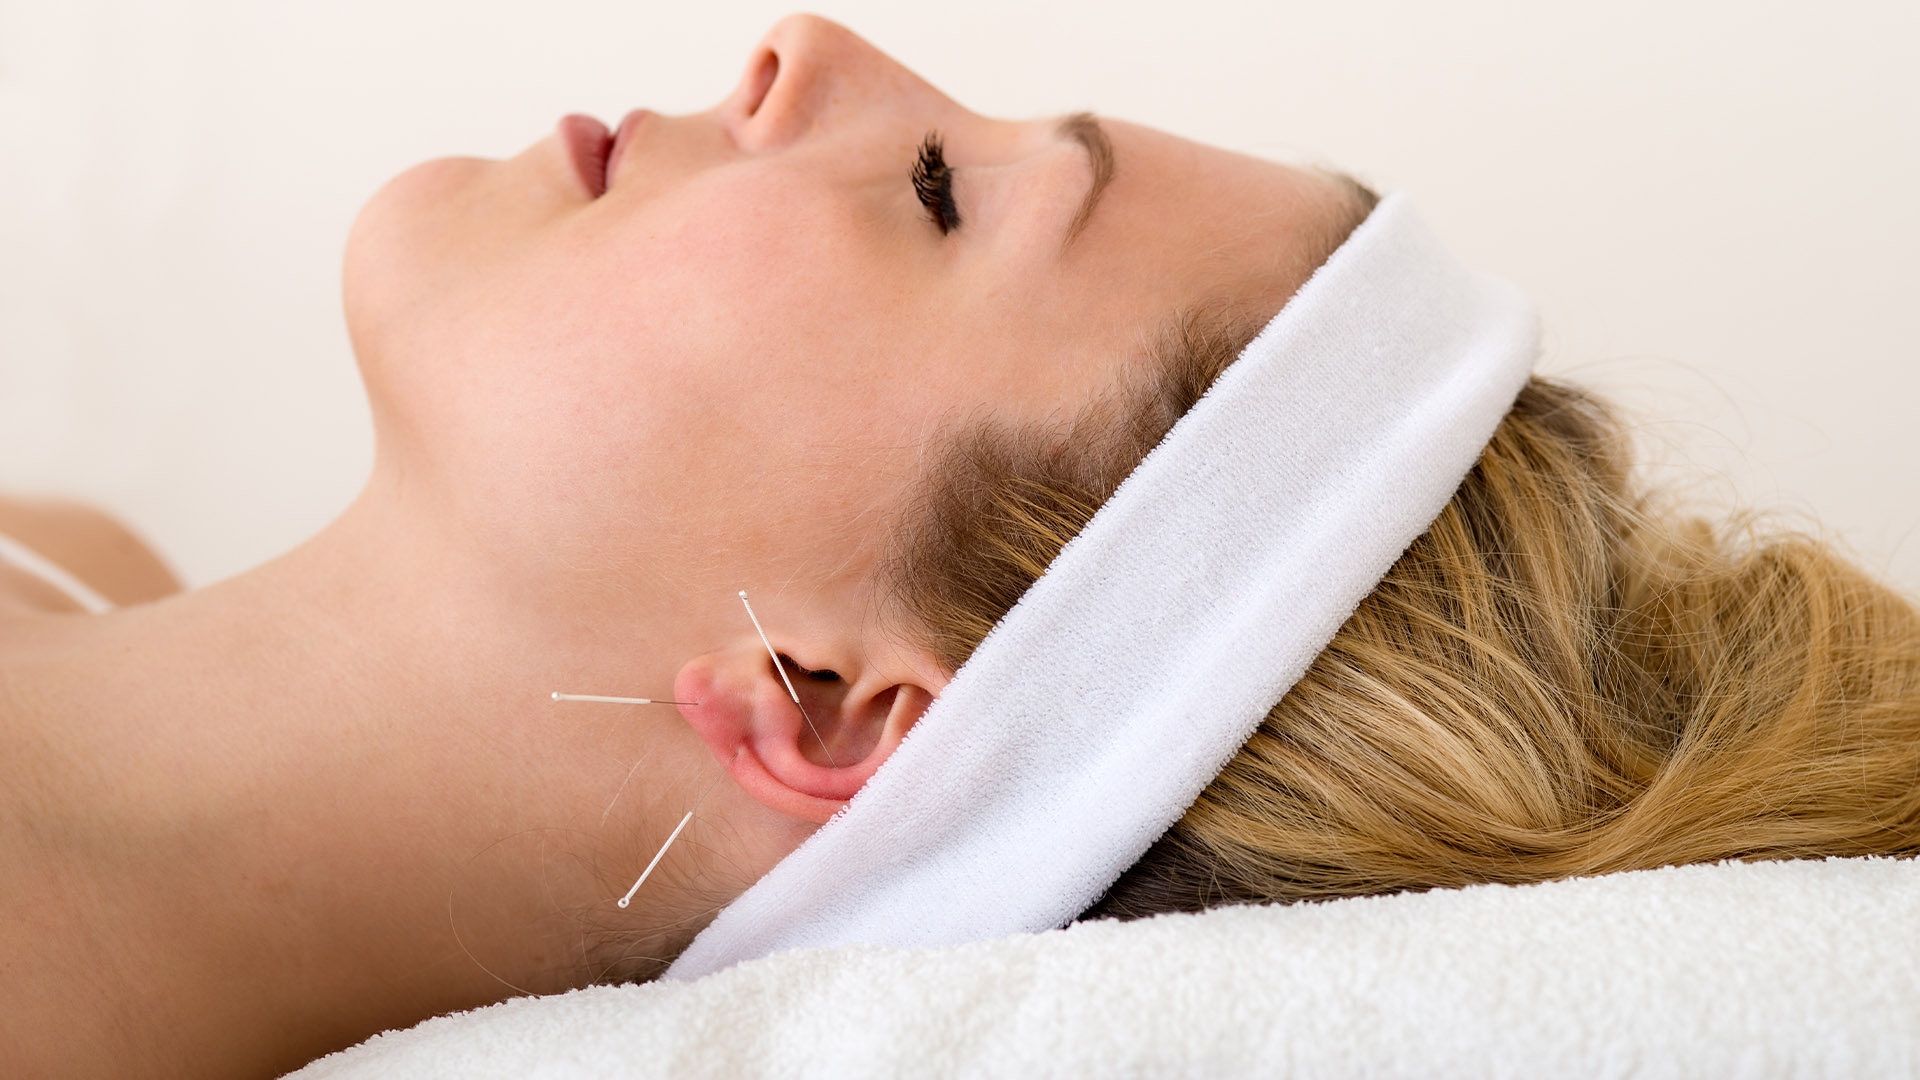 Auriculotherapy or Ear Acupuncture